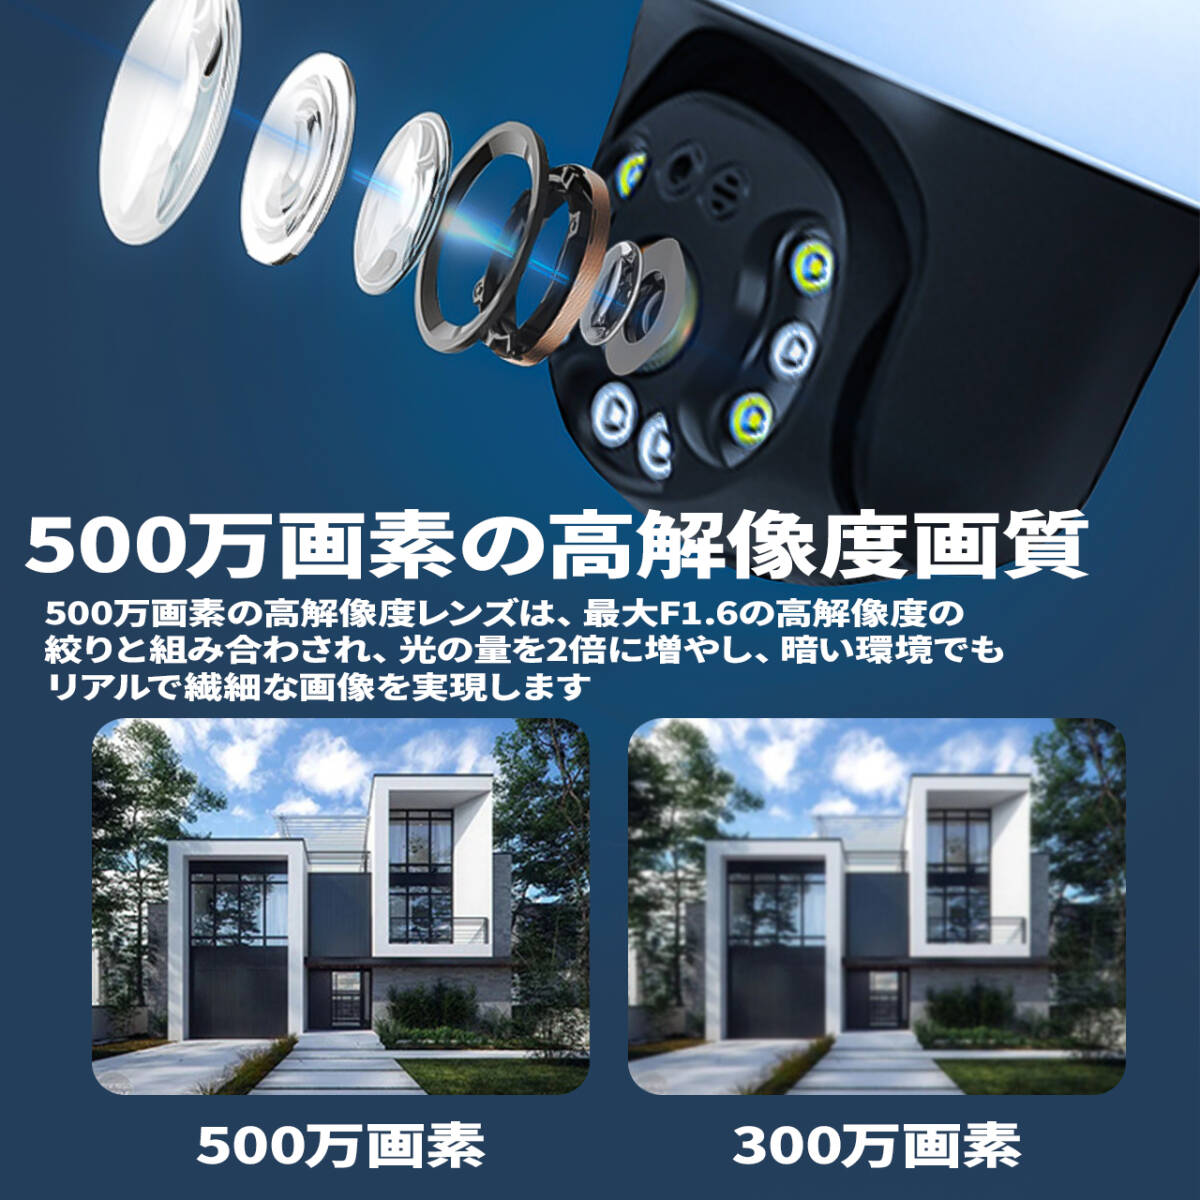 500 ten thousand pixels outdoors installation type waterproof security camera WIFI connection 128GTF card attaching security camera monitoring camera automatic . tail interactive conversation possibility 